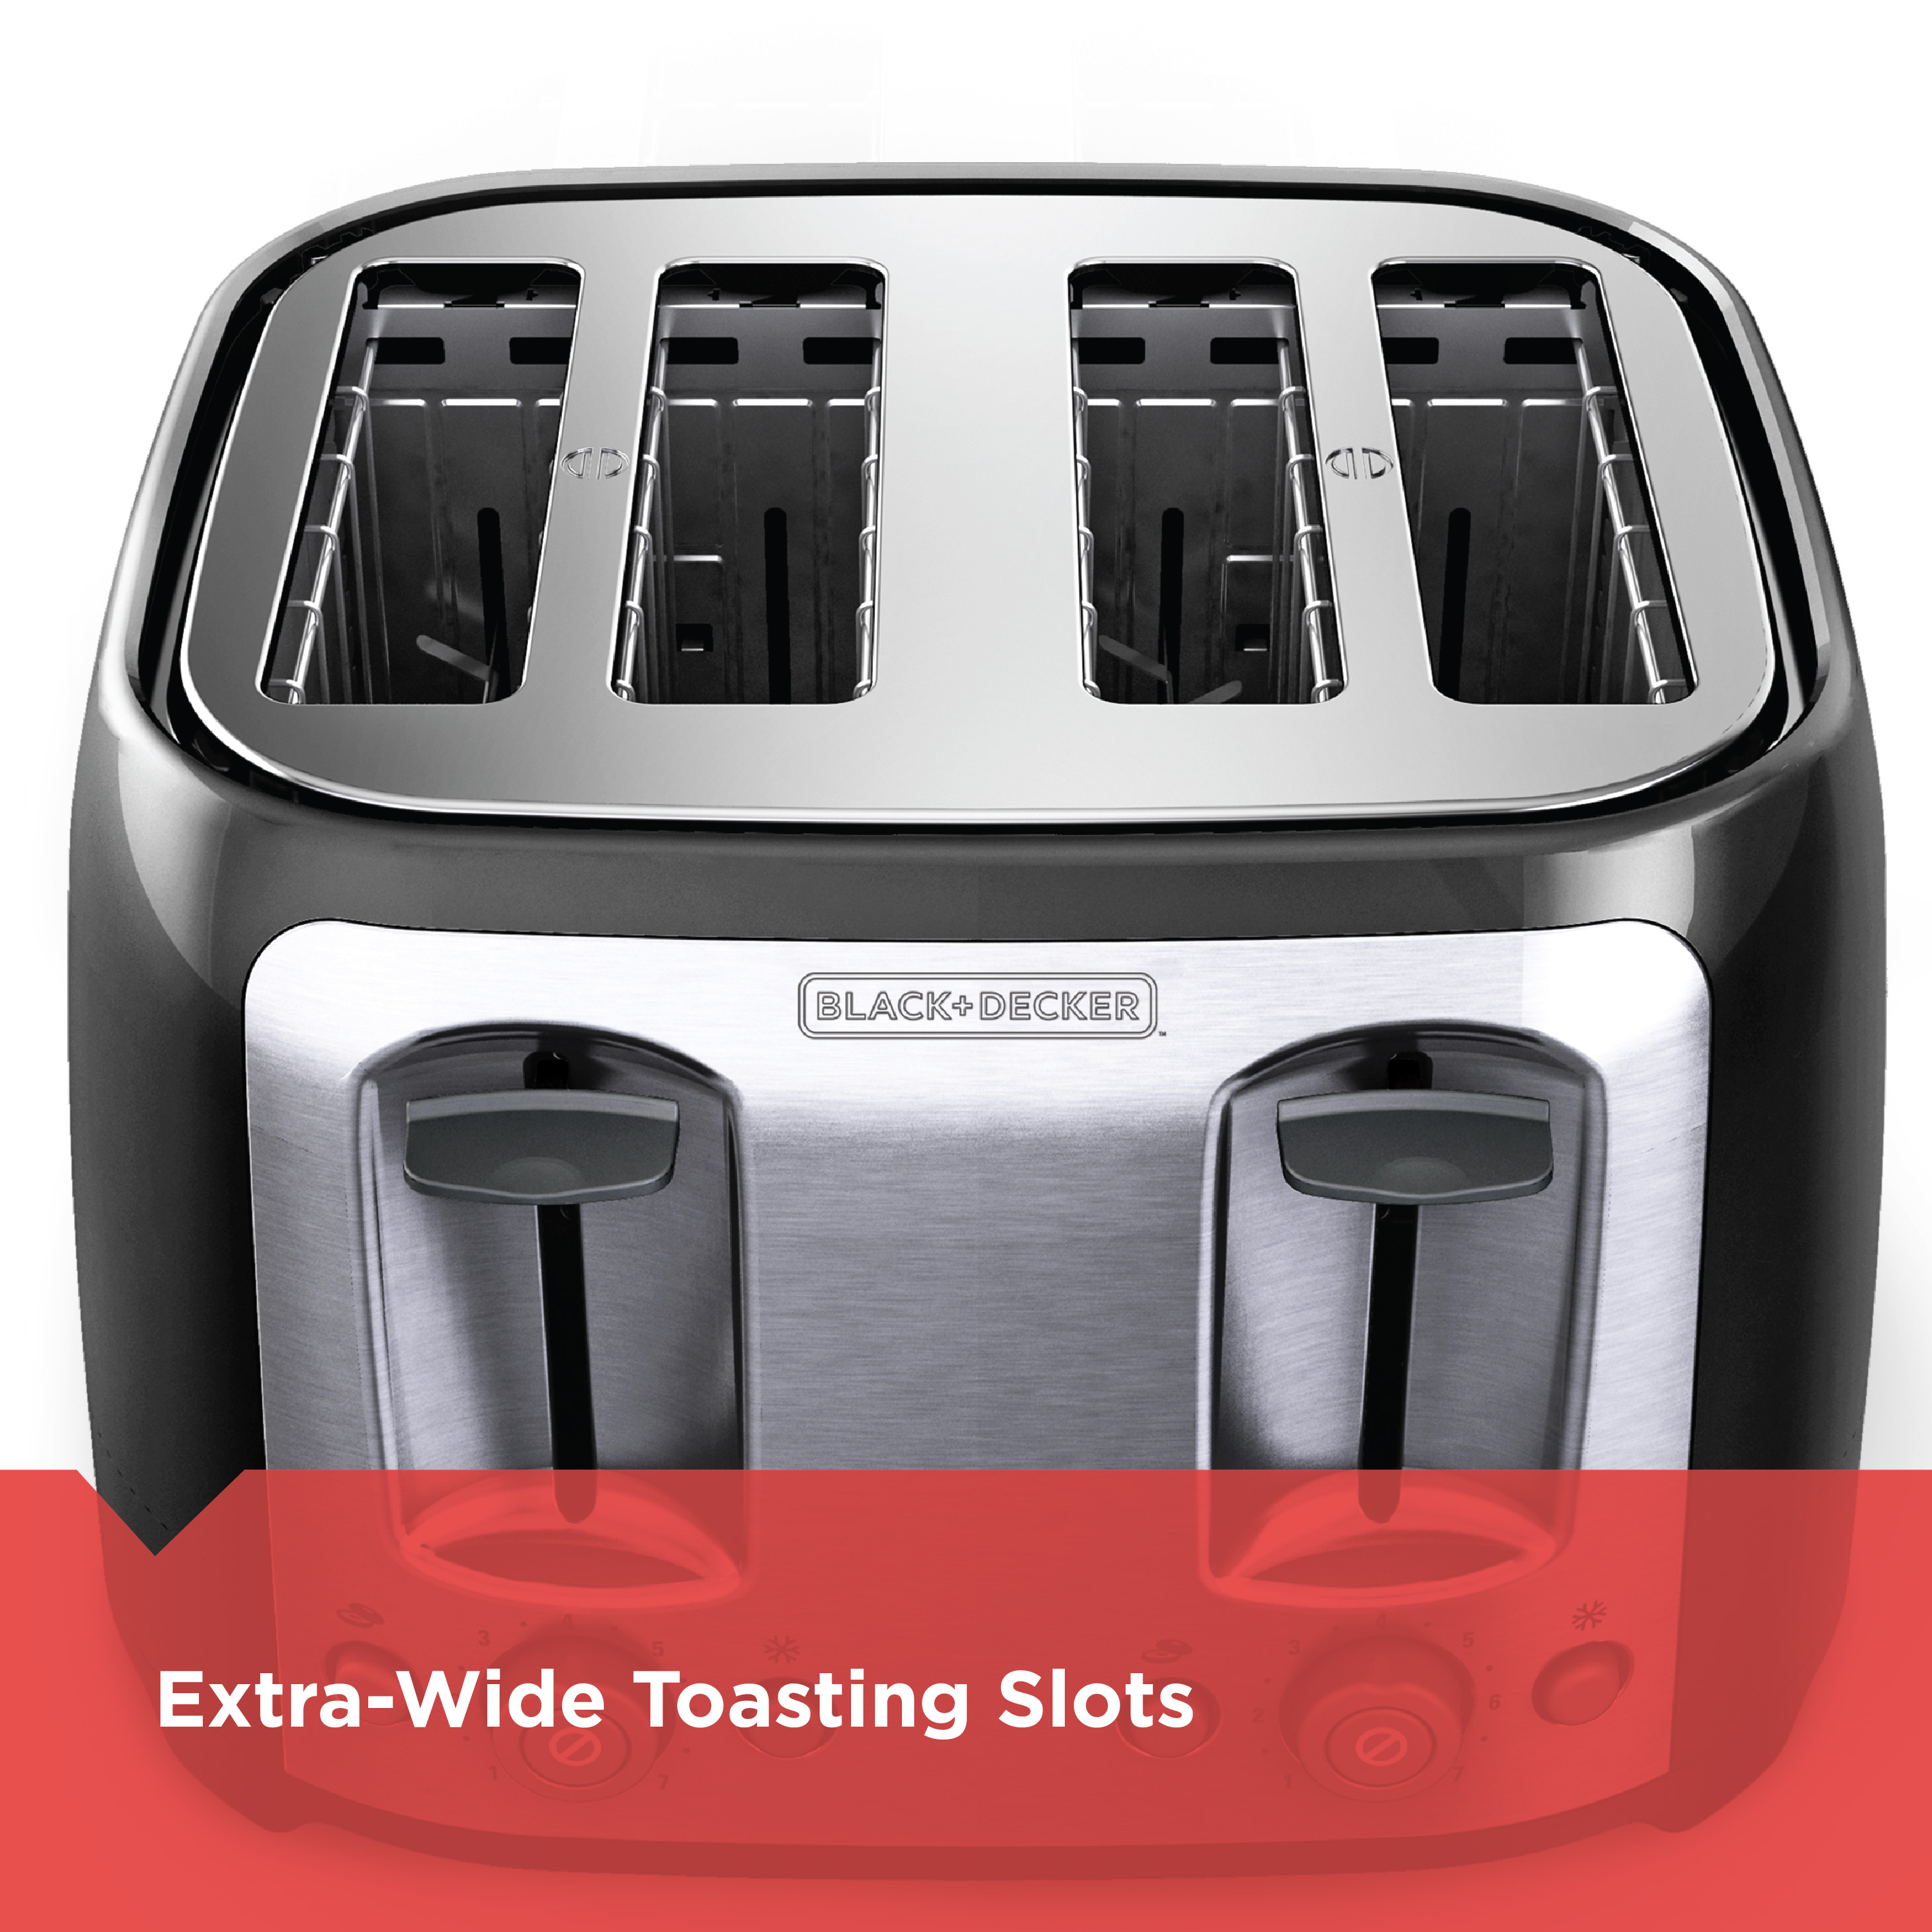 BLACK+DECKER 4-Slice Toaster with Extra-Wide Slots, Black/Silver, TR1478BD - image 4 of 10